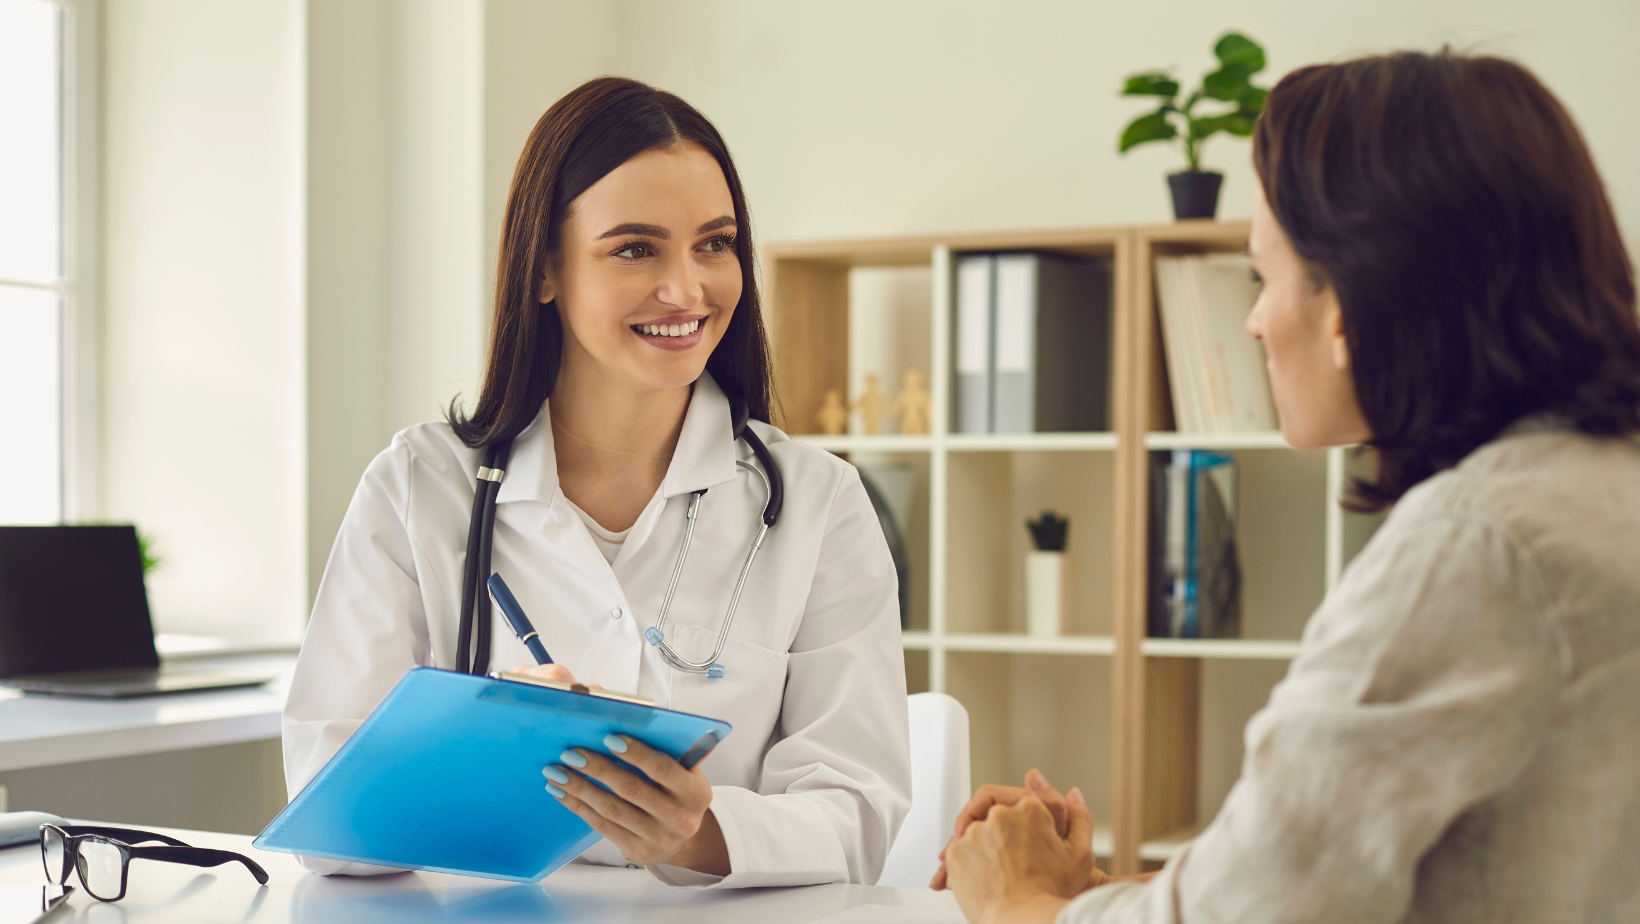 A female medical professional holds a clip board and smiles at a female patient. The image represents the common questions and concerns regarding Bladder and Bowel Health Issues.